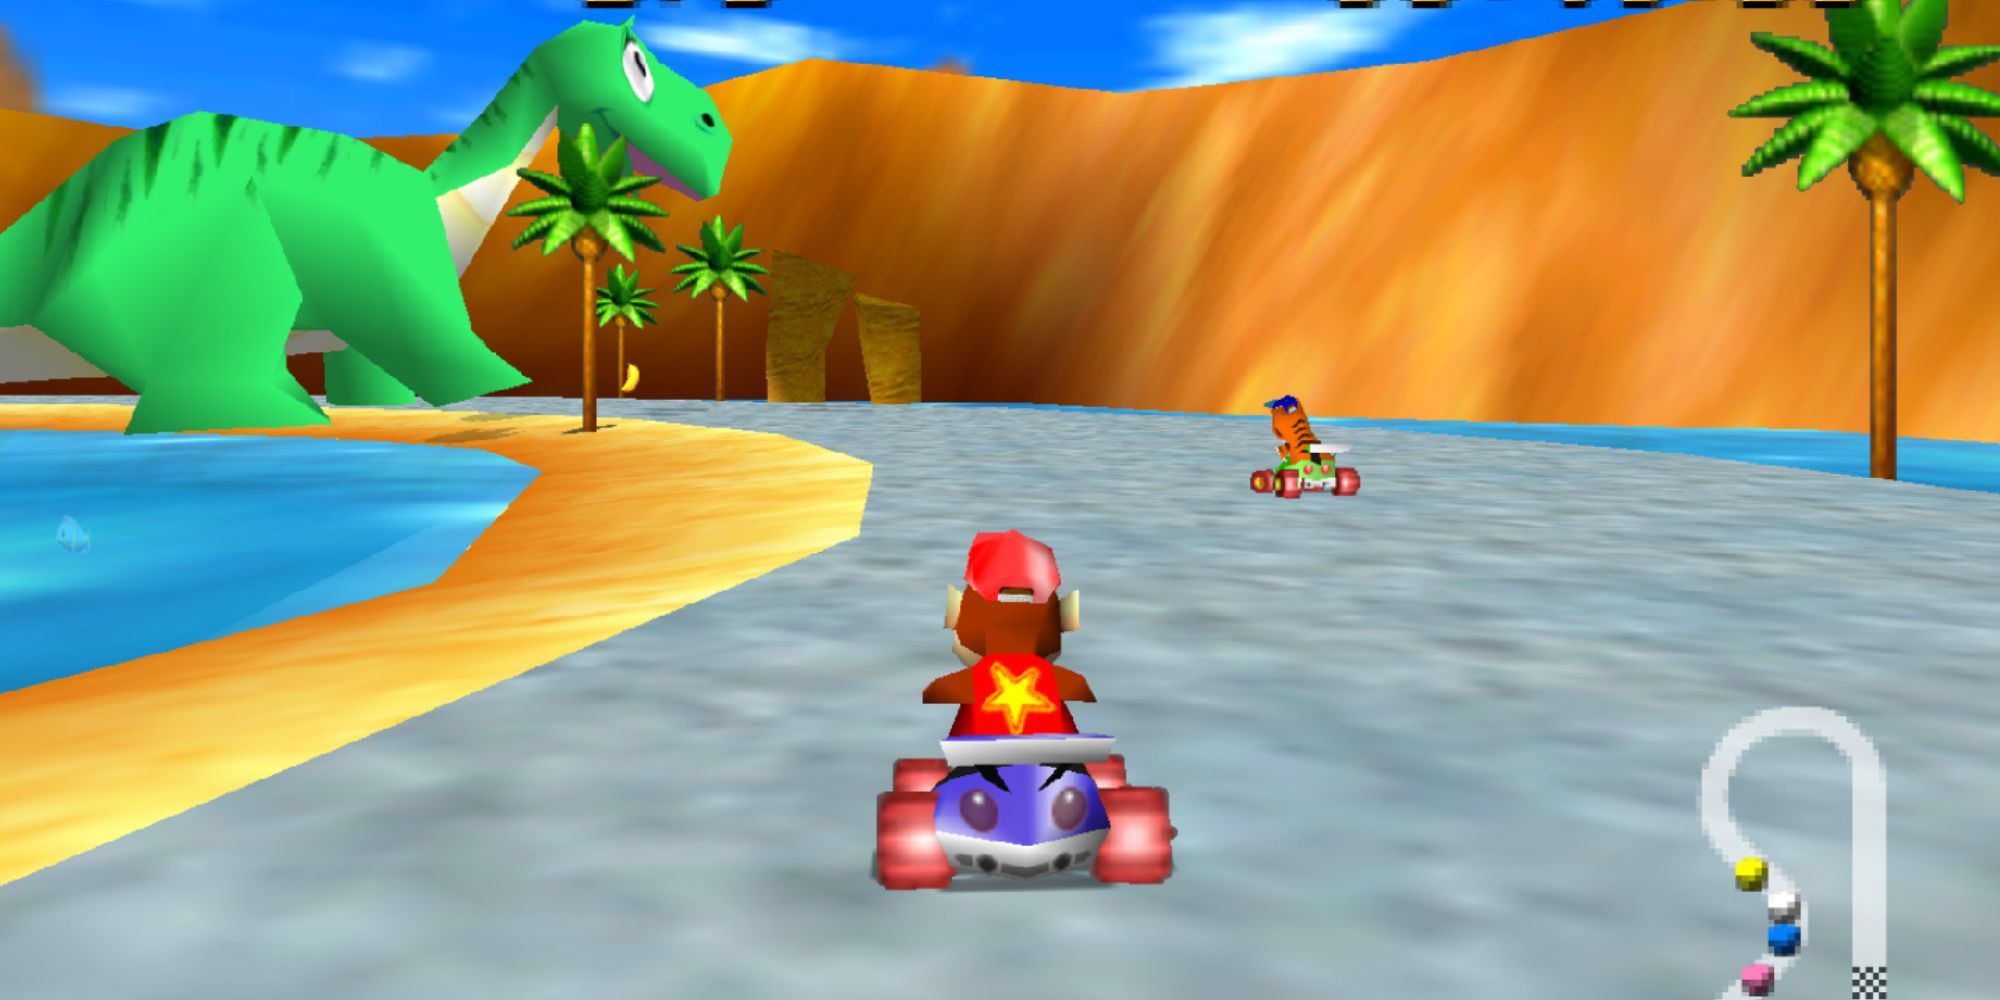 Diddy Kong races down the track on one of the dinosaur stages in Diddy Kong Racing